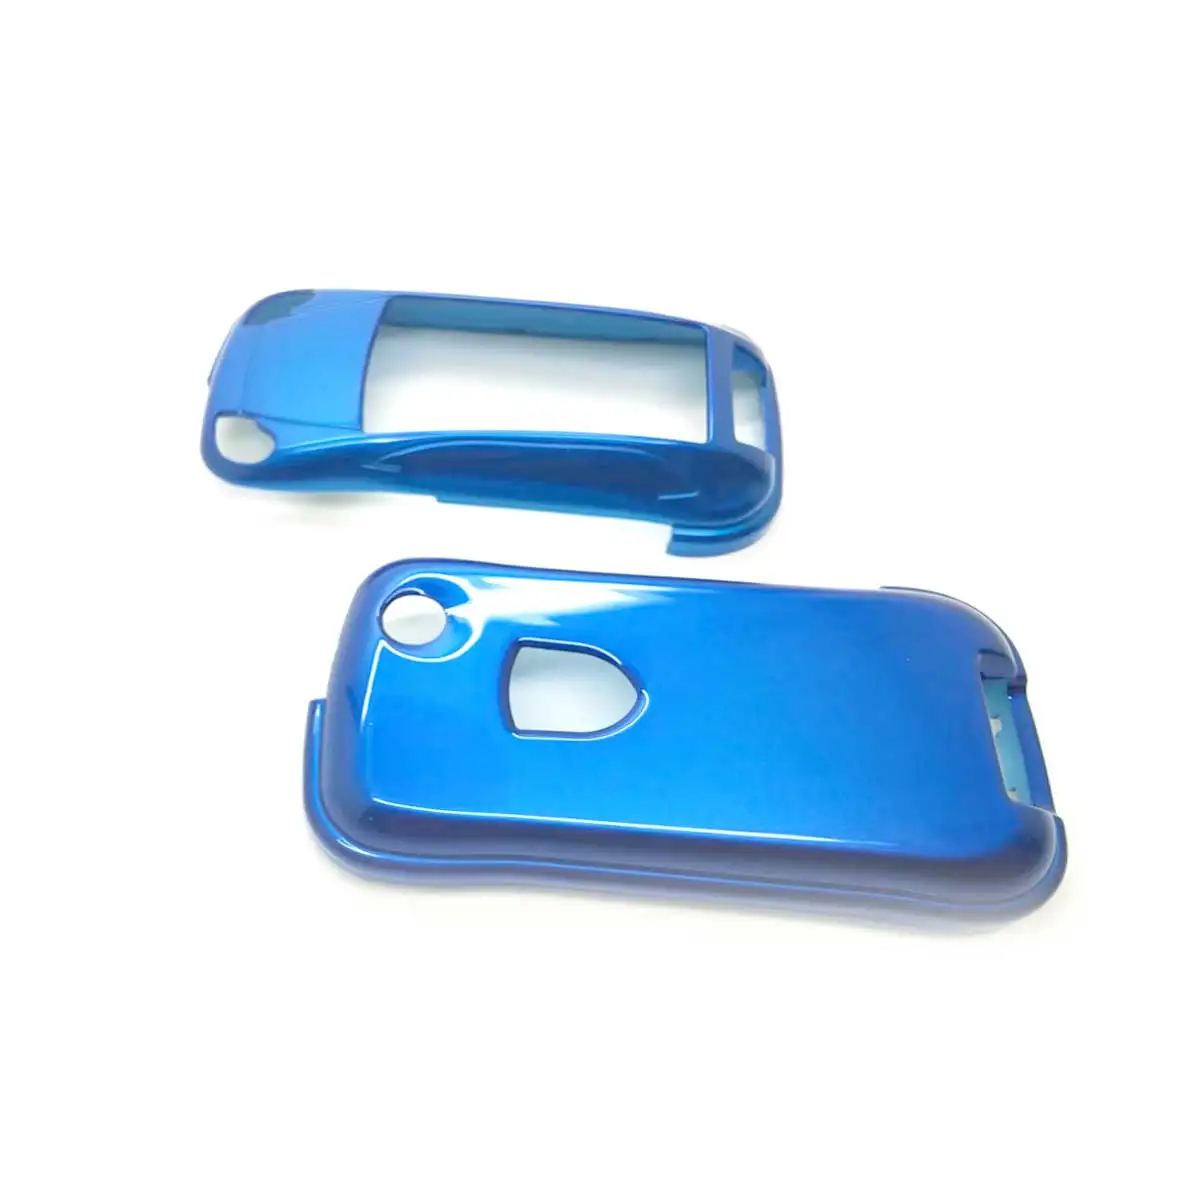 

Metallic blue Remote Key Case Protector Accessories Cover Shell For Porsche Cayenne 1st Gen. (2003-2010)